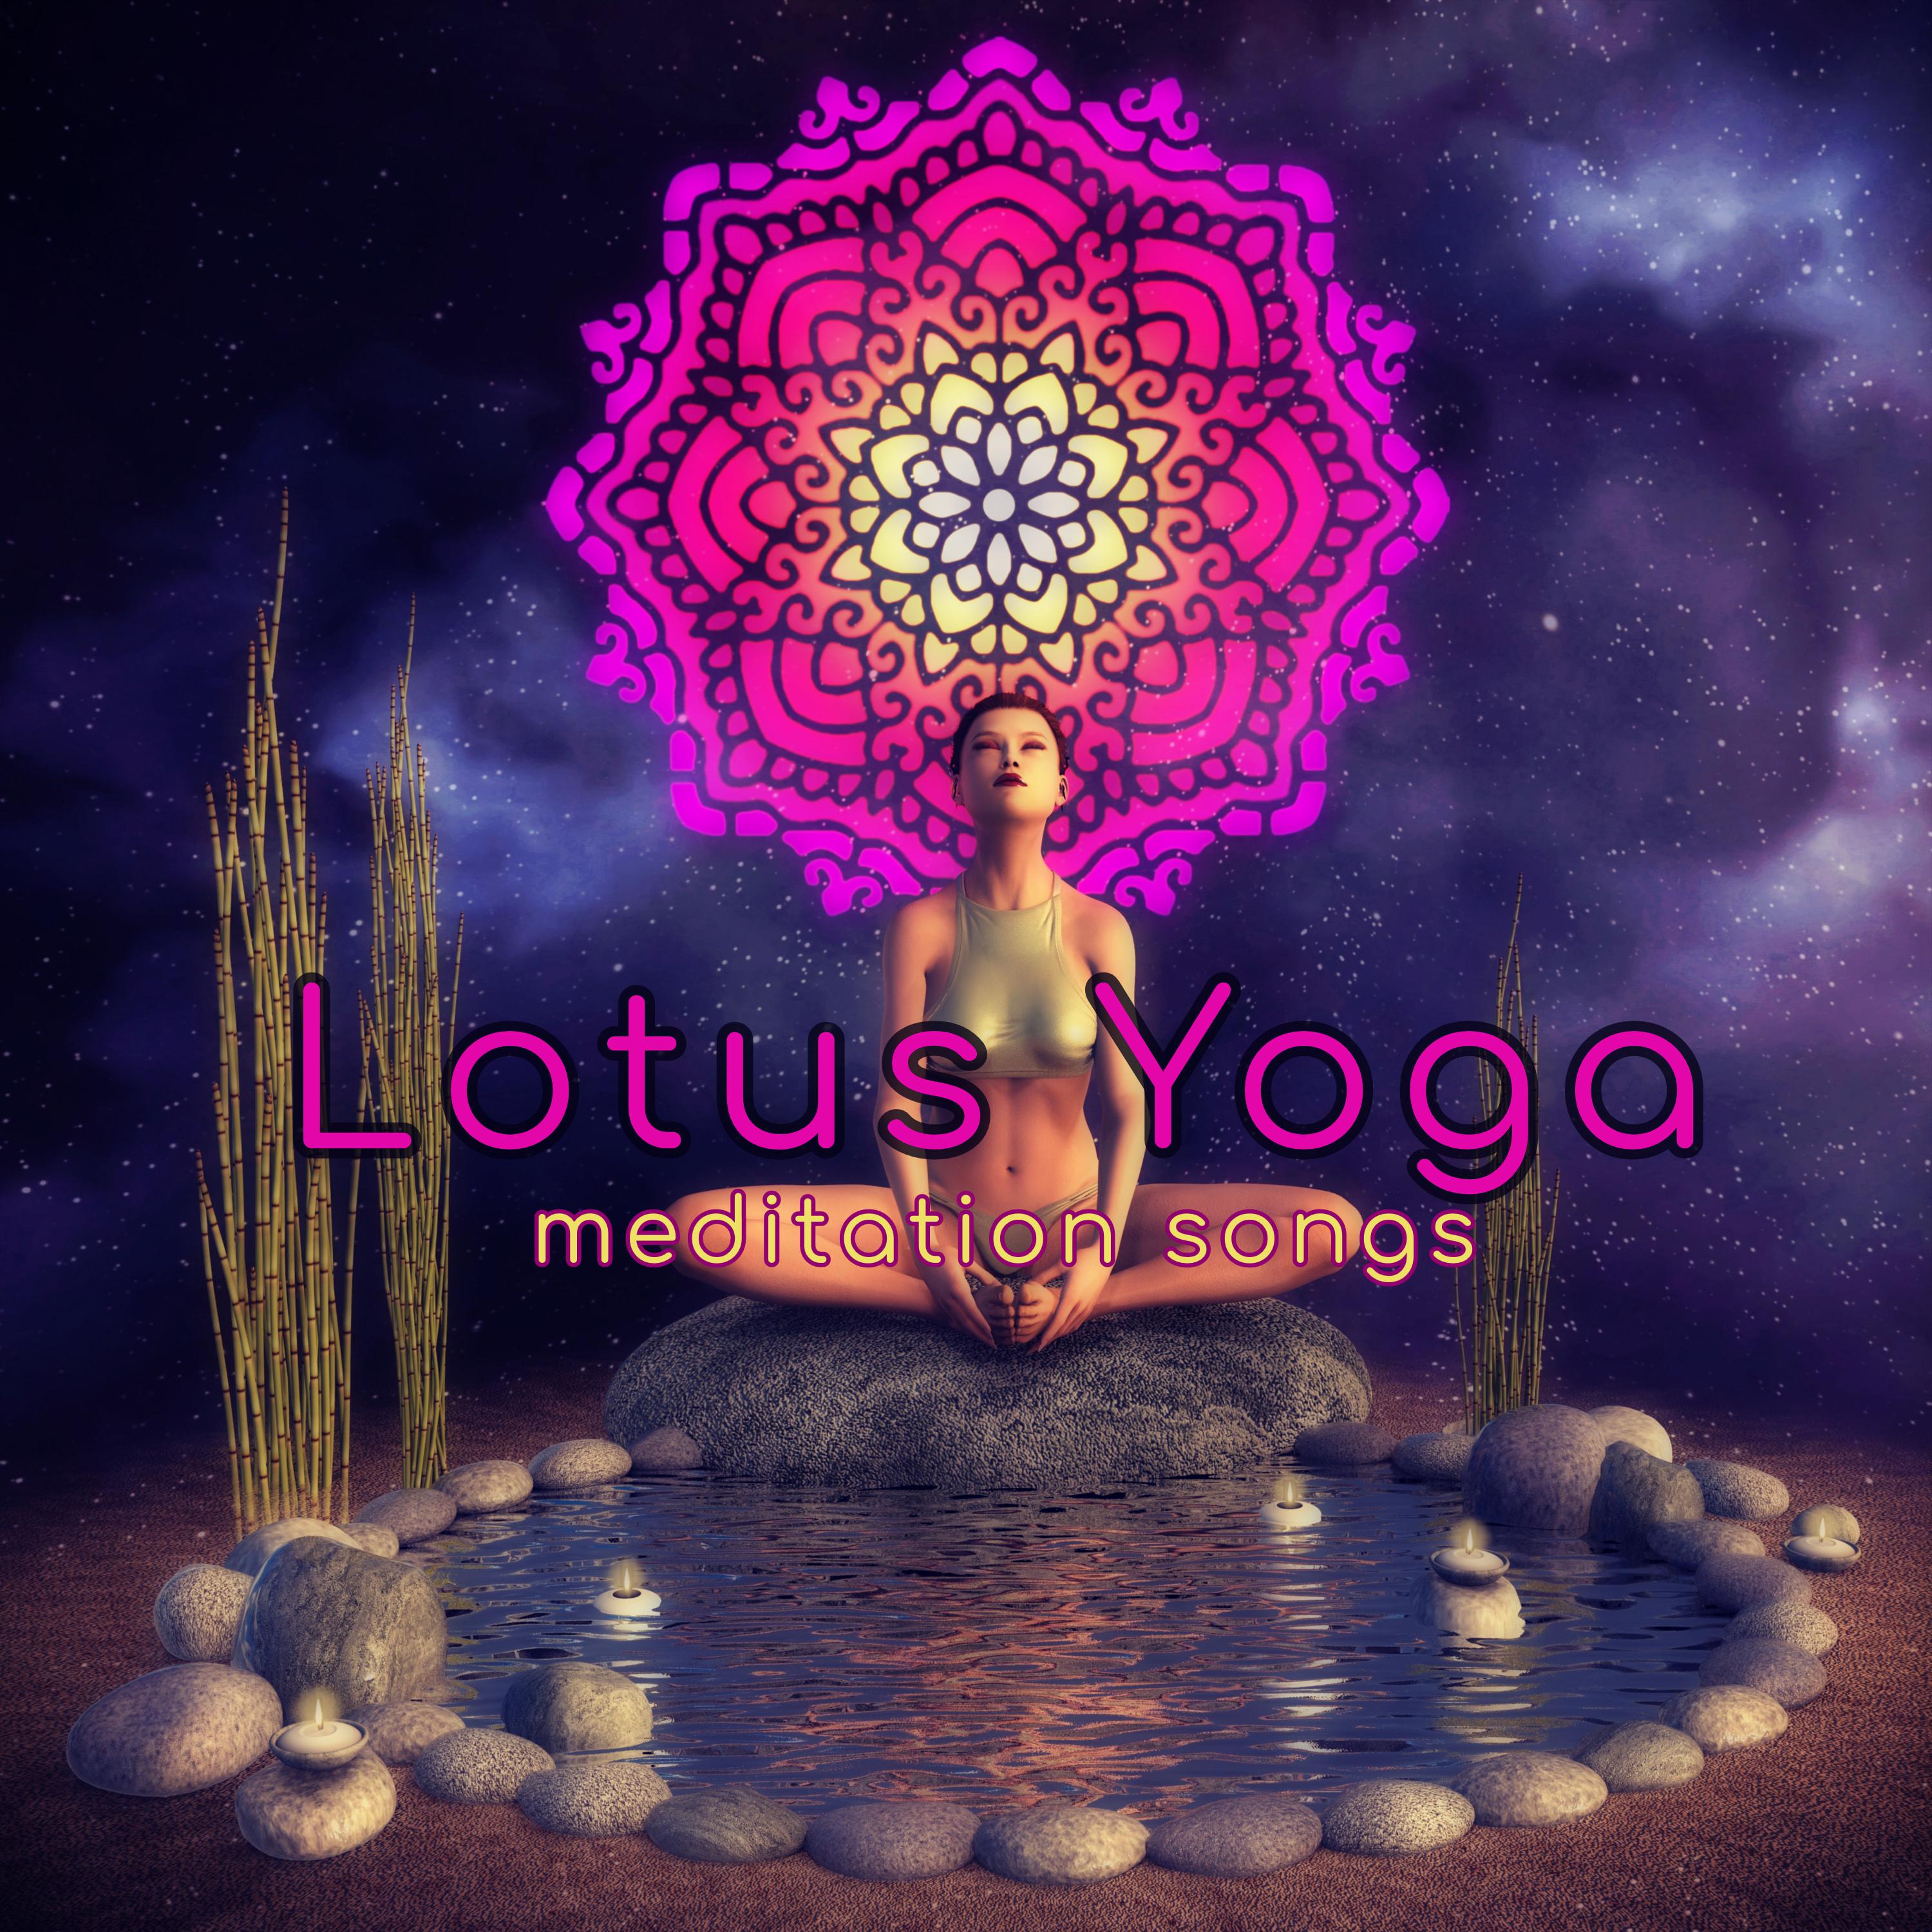 Ambient Soundscapes - Meditation Songs for Yoga Retreats